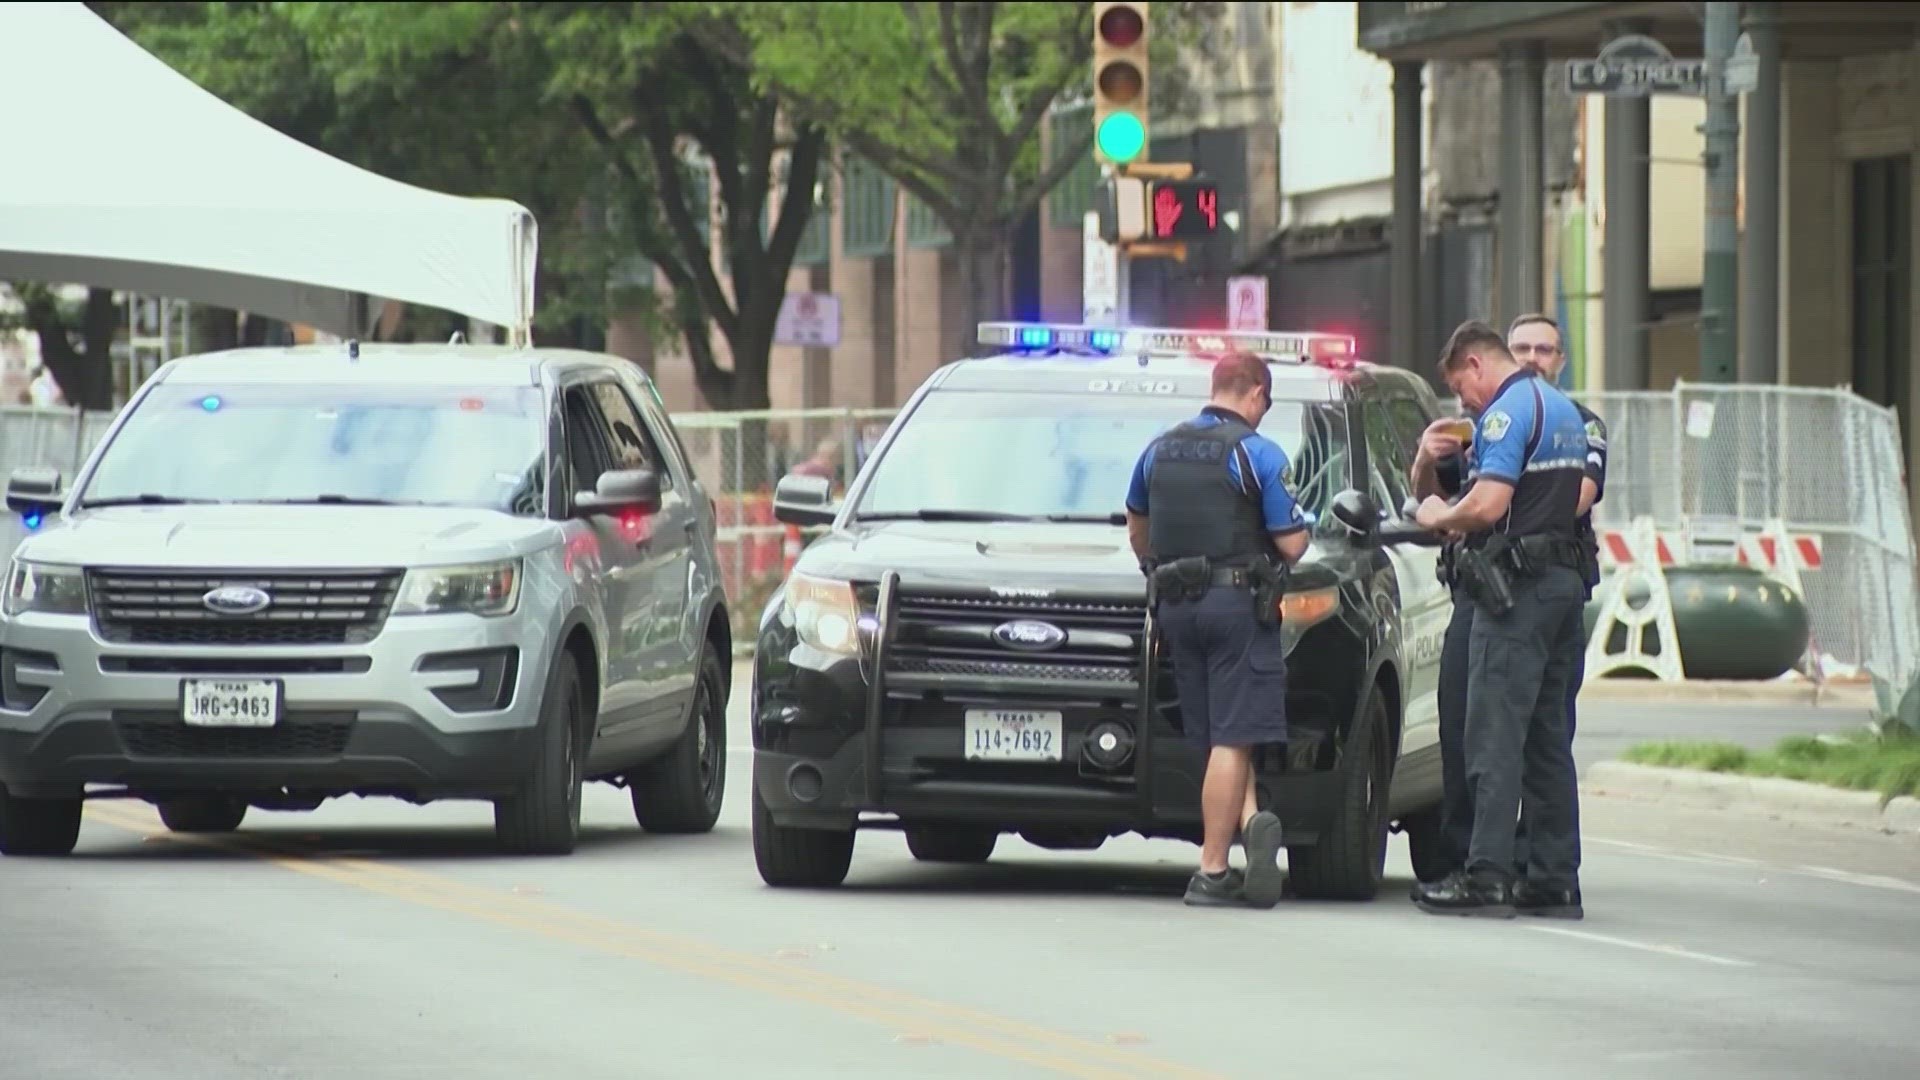 Austin police officers and DPS troopers are back patrolling the streets together after a temporary suspension. While some are welcoming the comeback, others are not.